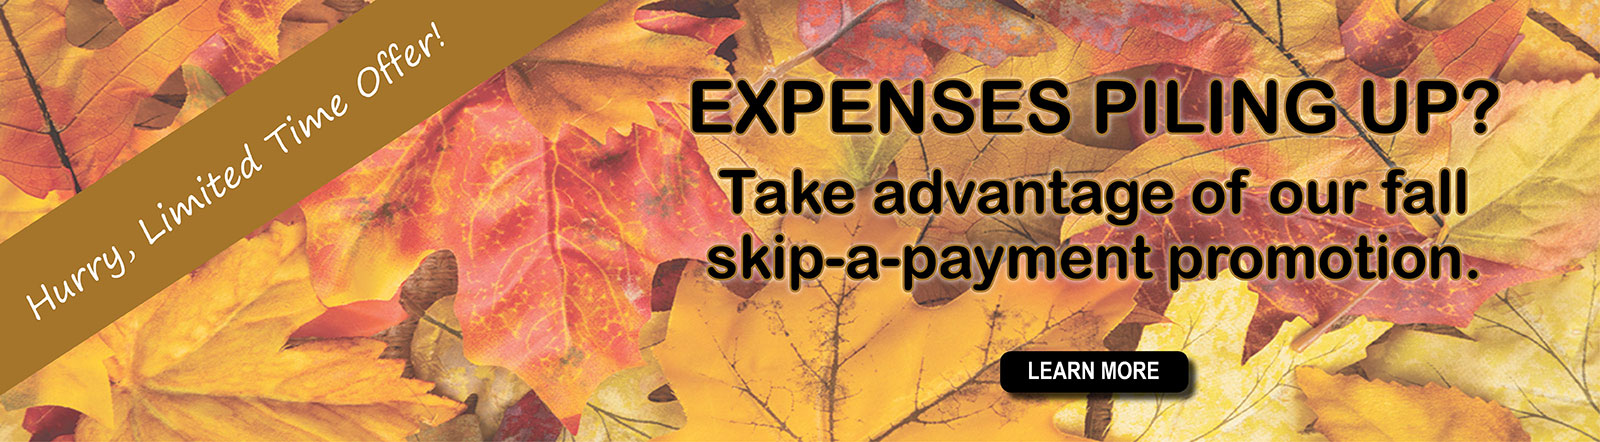 Expenses piling up? Take advantage of our fall skip-a-payment promotion for a limited time.